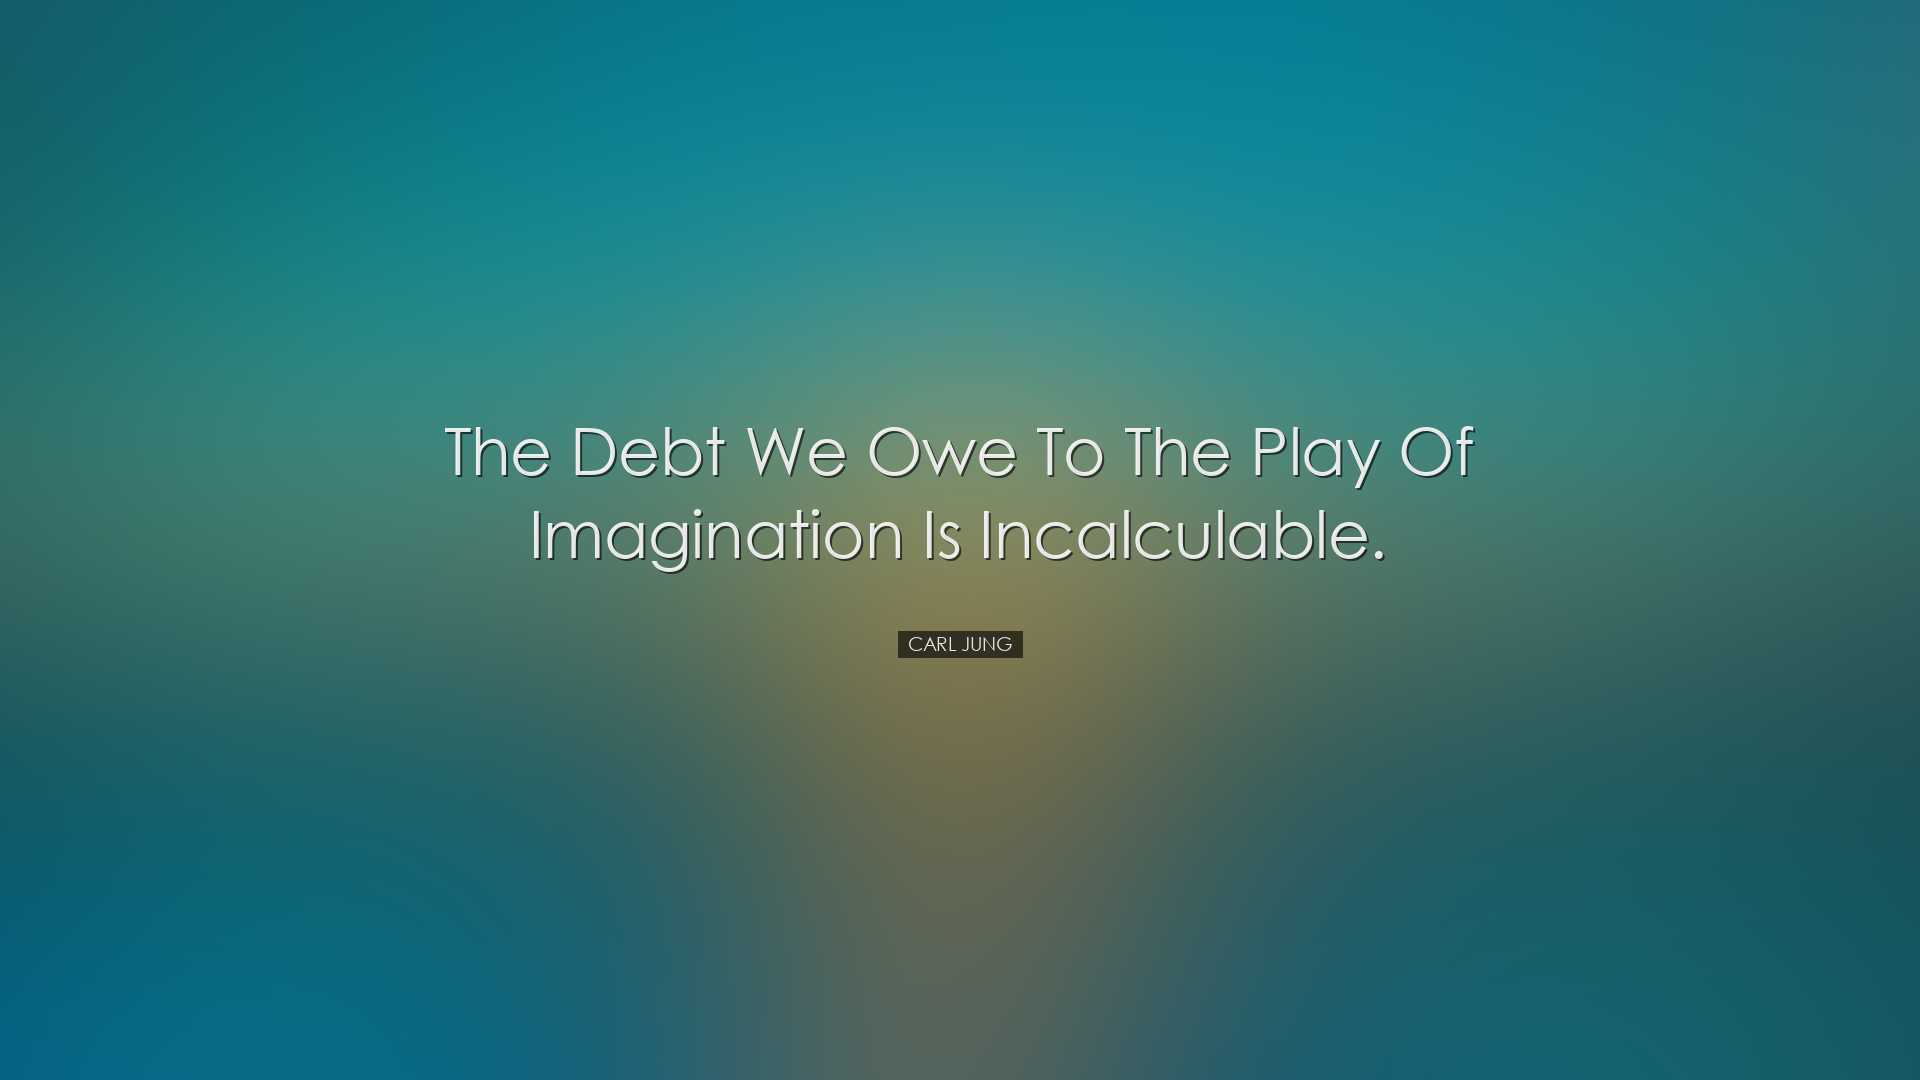 The debt we owe to the play of imagination is incalculable. - Carl